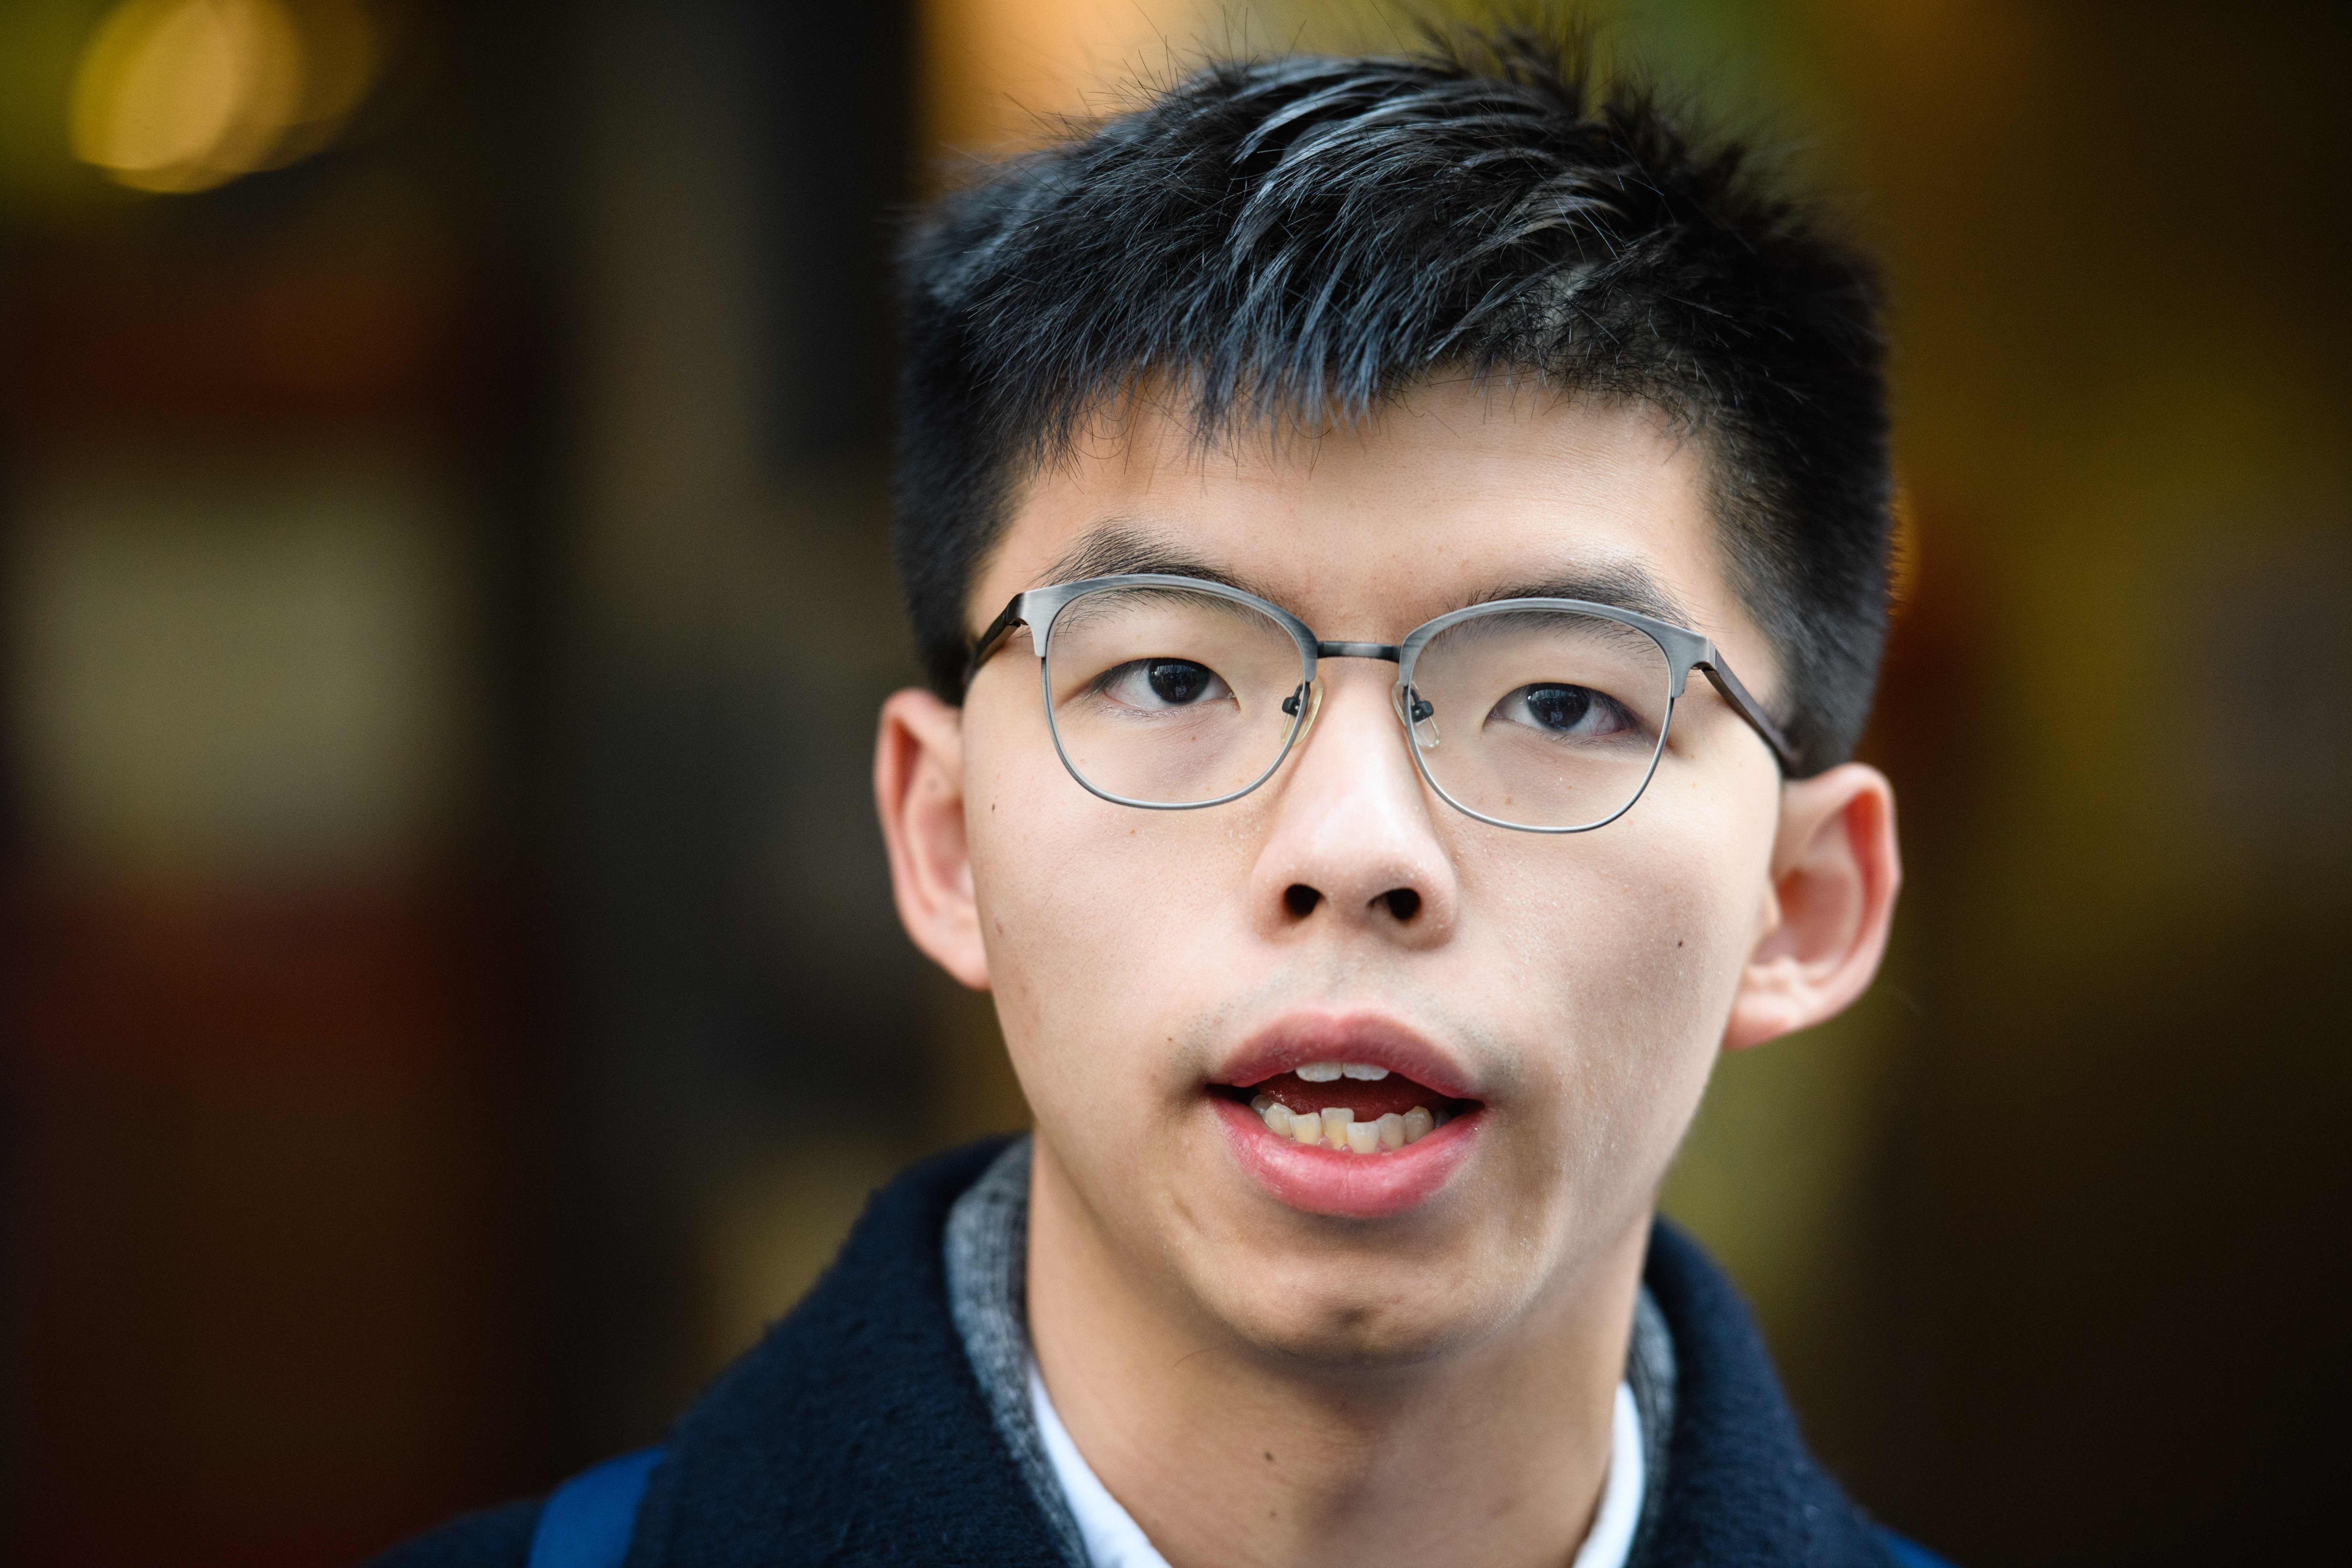 Pro-democracy campaigner Joshua Wong speaks tot he press outside a polling station in Hong Kong on March 11, 2018. (Anthony Wallace—AFP/Getty Images)